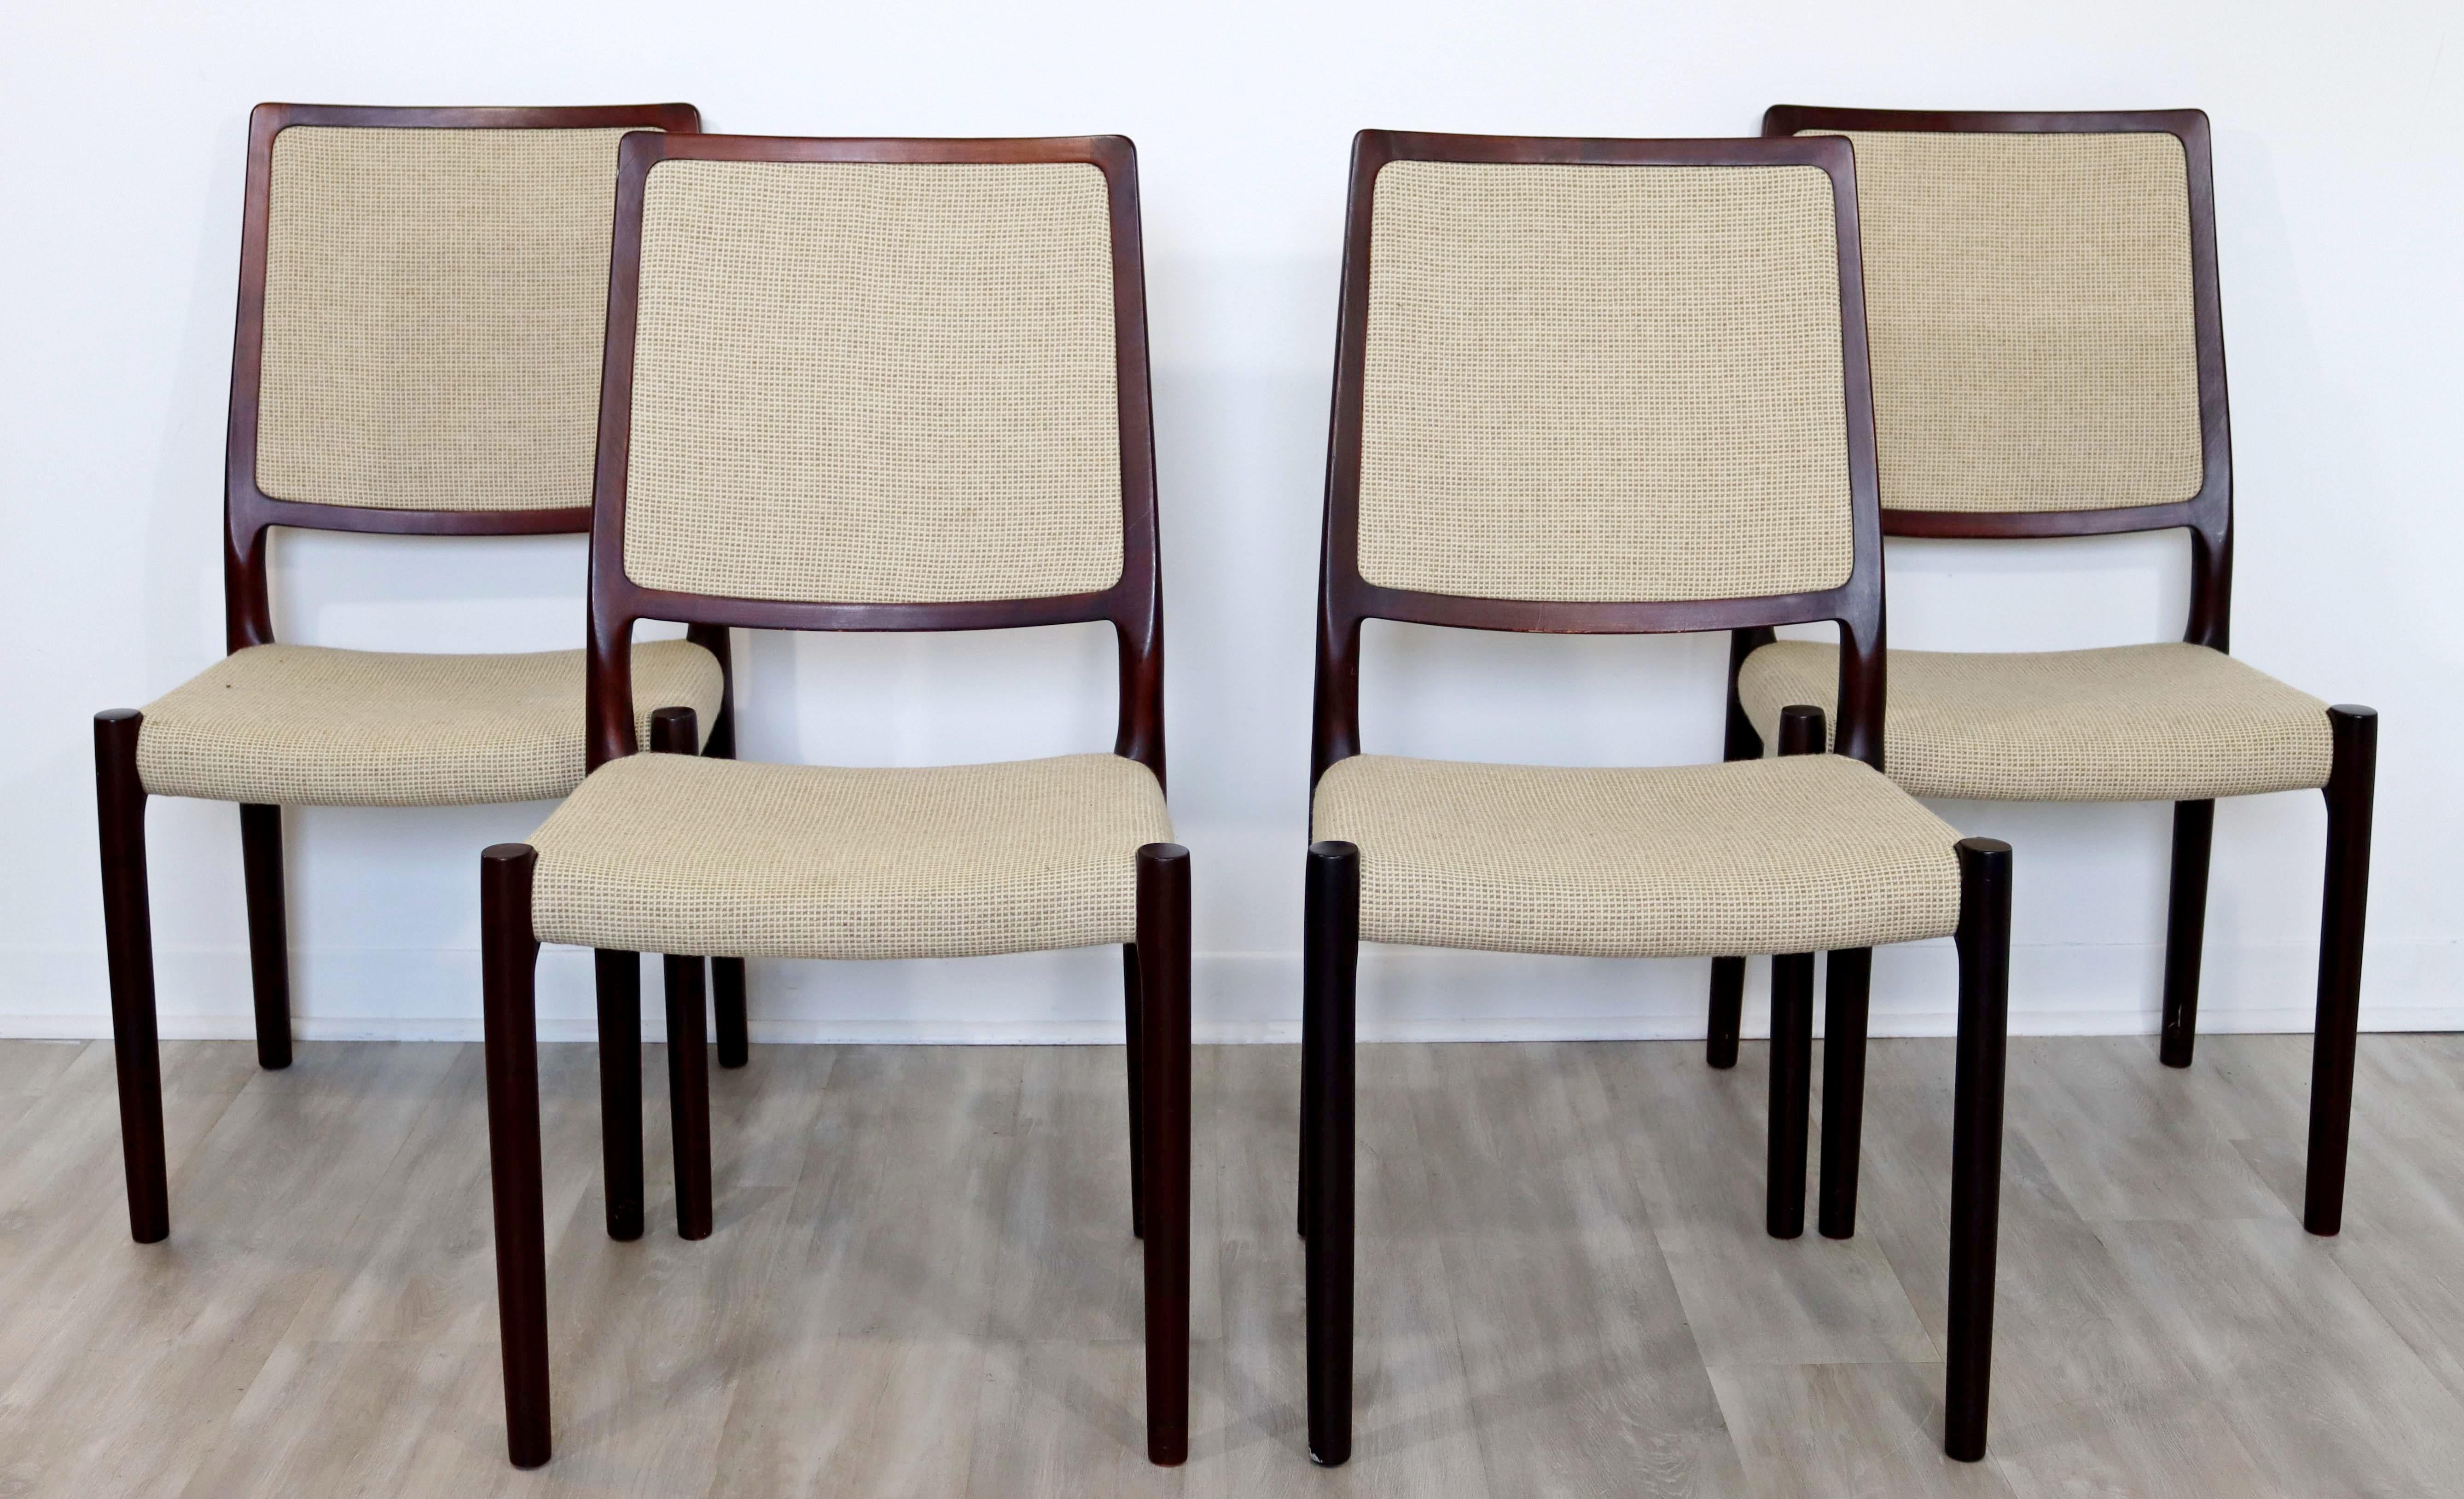 For your consideration is a ravishing, rosewood dining set, including four chairs and a table with two leaves, by Kibaek Mobelfabrik, made in Denmark, circa the 1960s. In excellent vintage condition. The dimensions of the table are 63